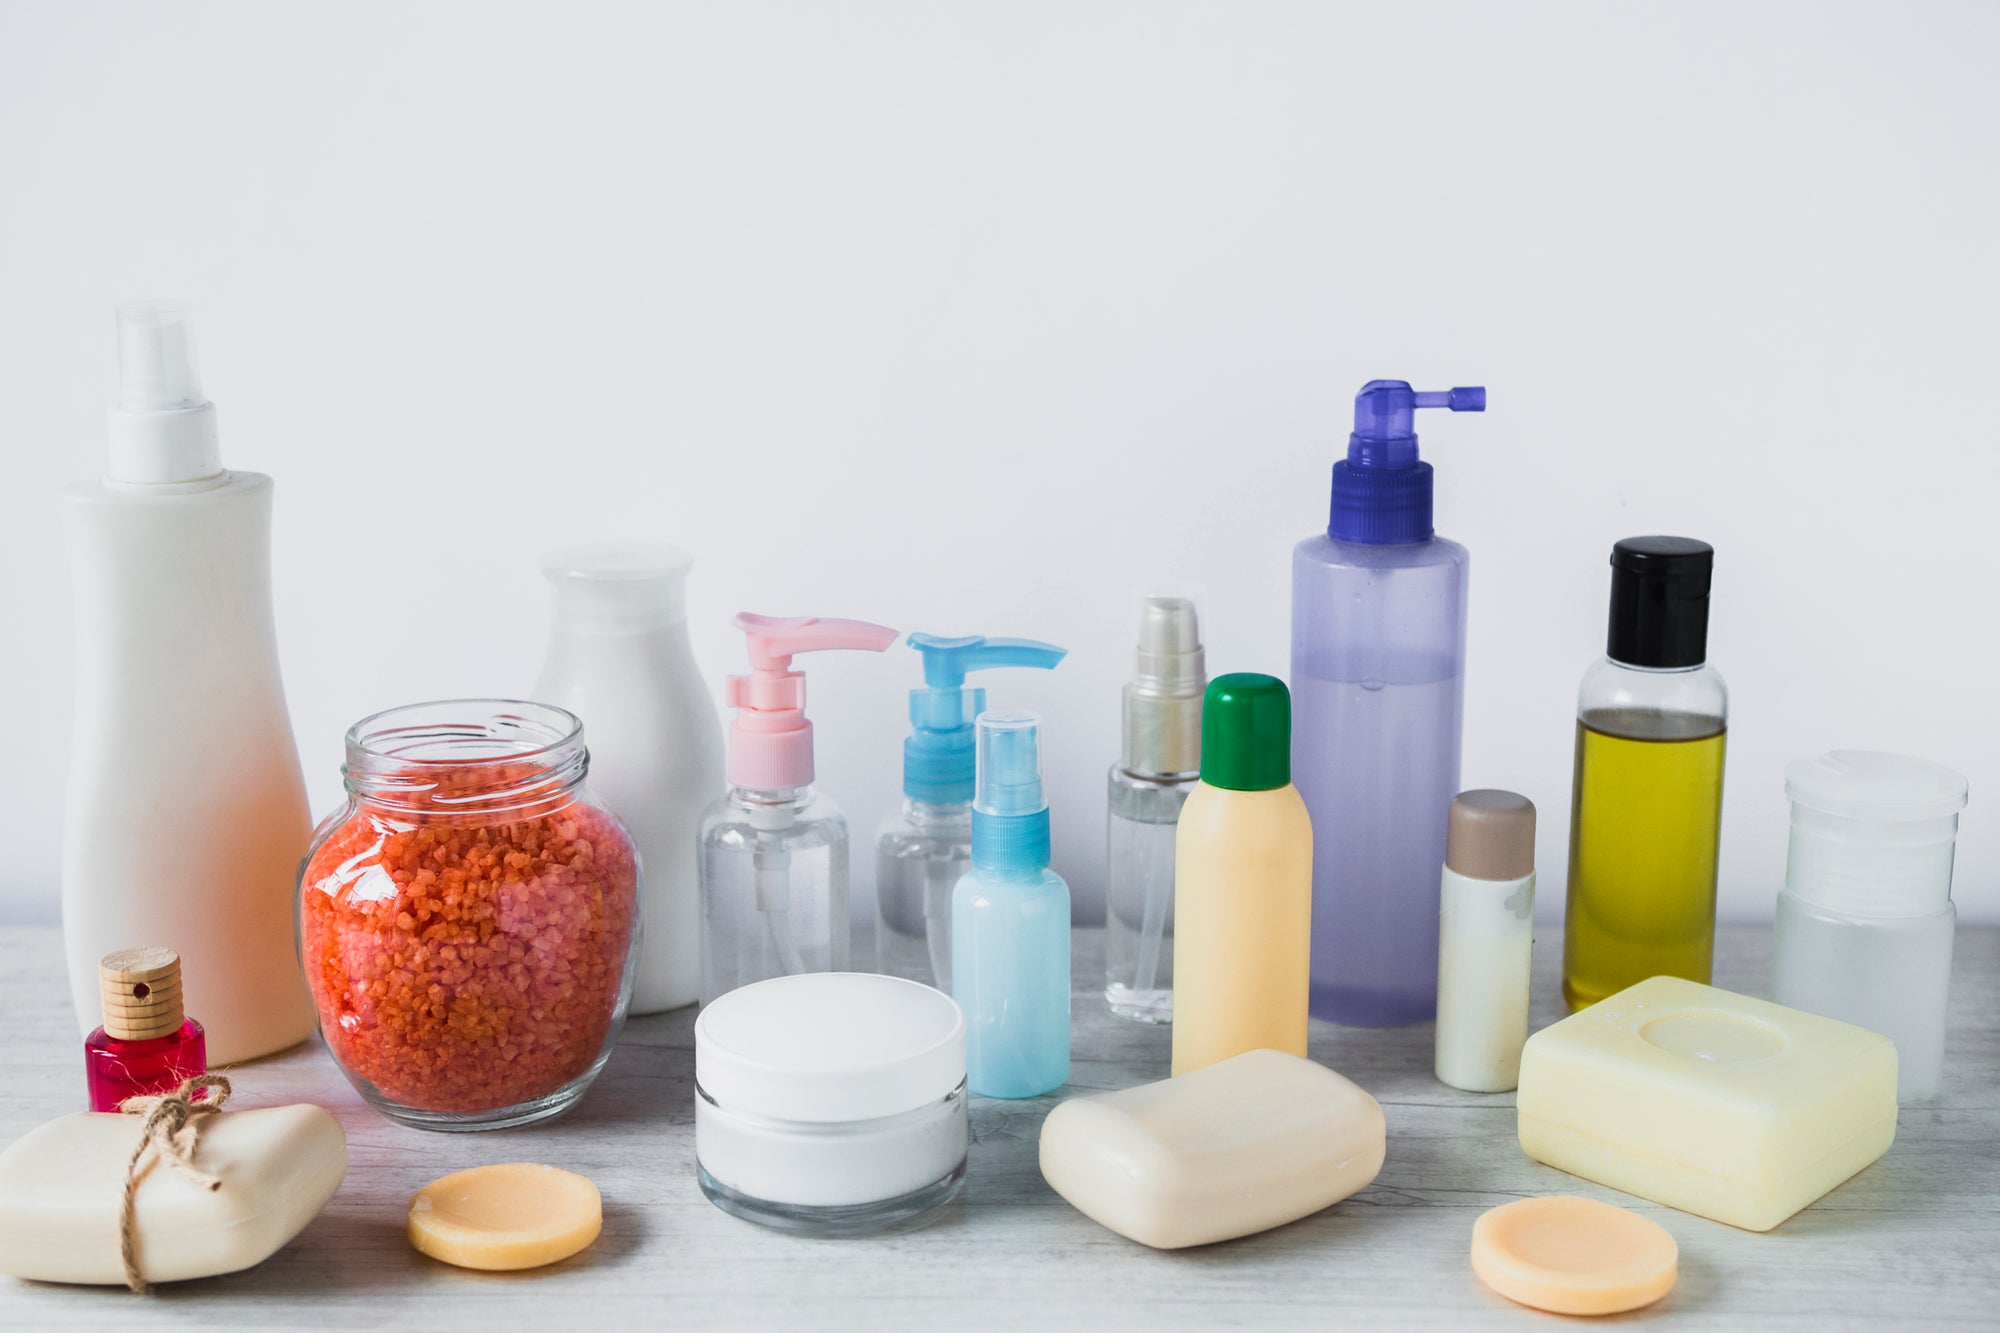 THE CHEMICALS IN COSMETICS AND HEALTH